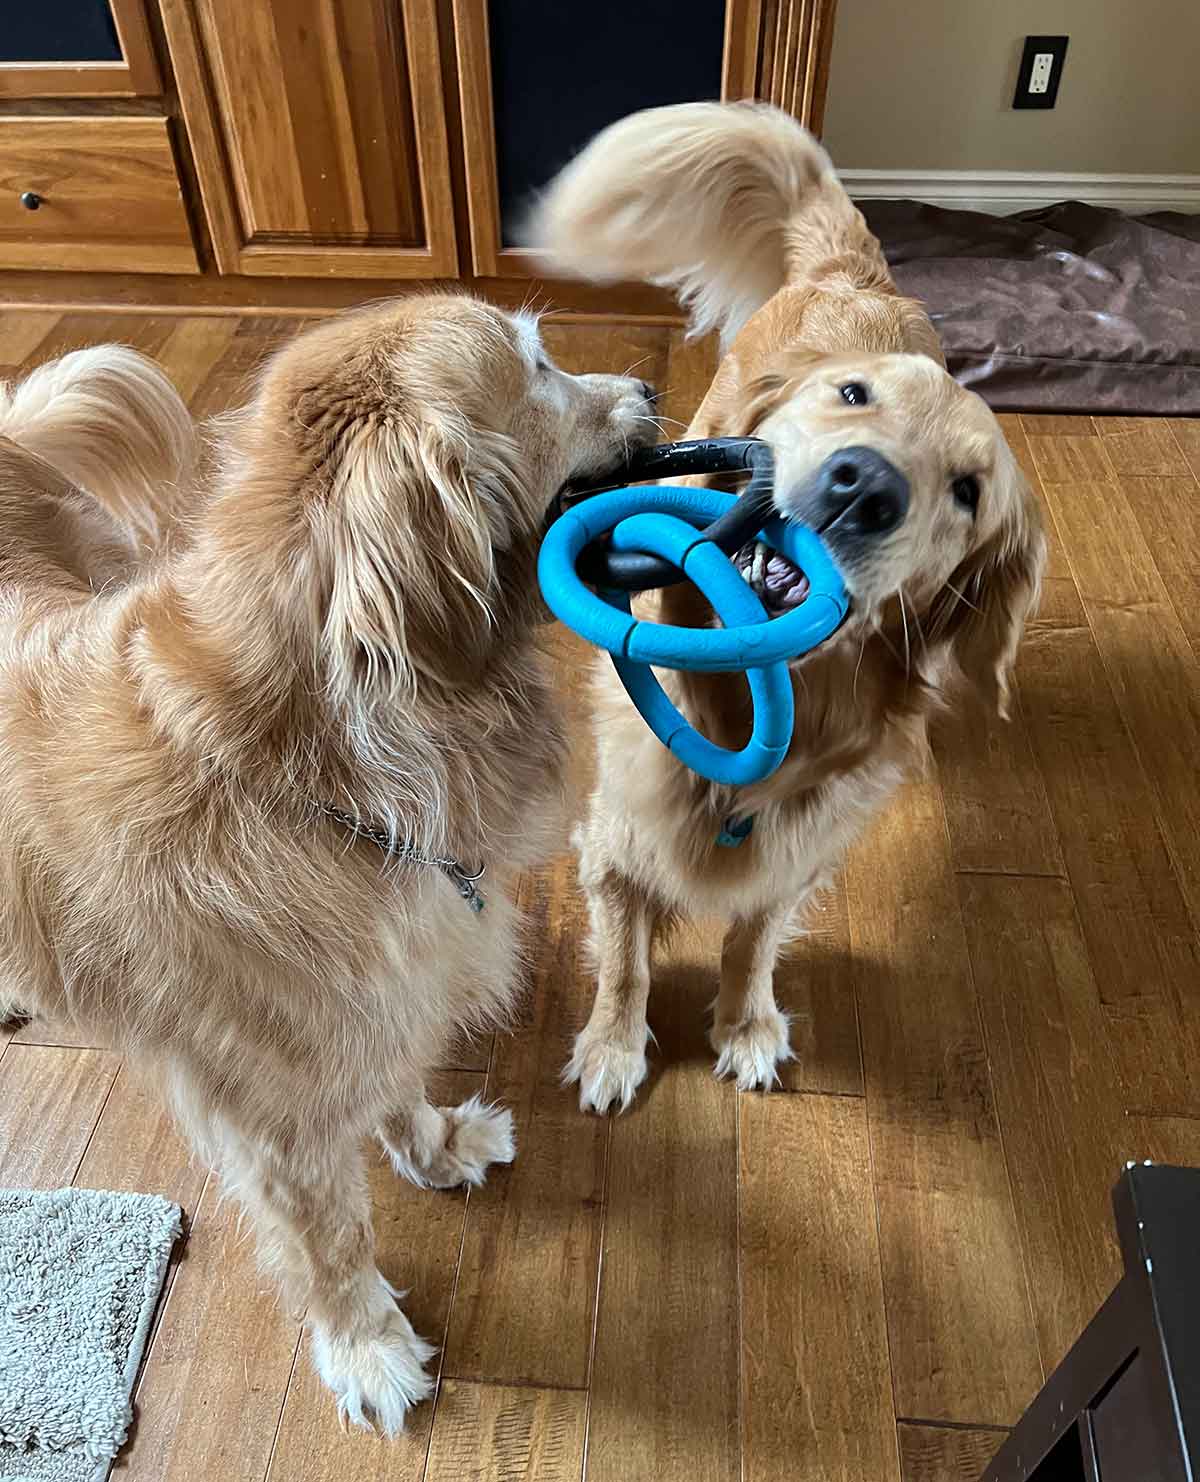 Two golden retrievers playing with a set of rubber rings together.